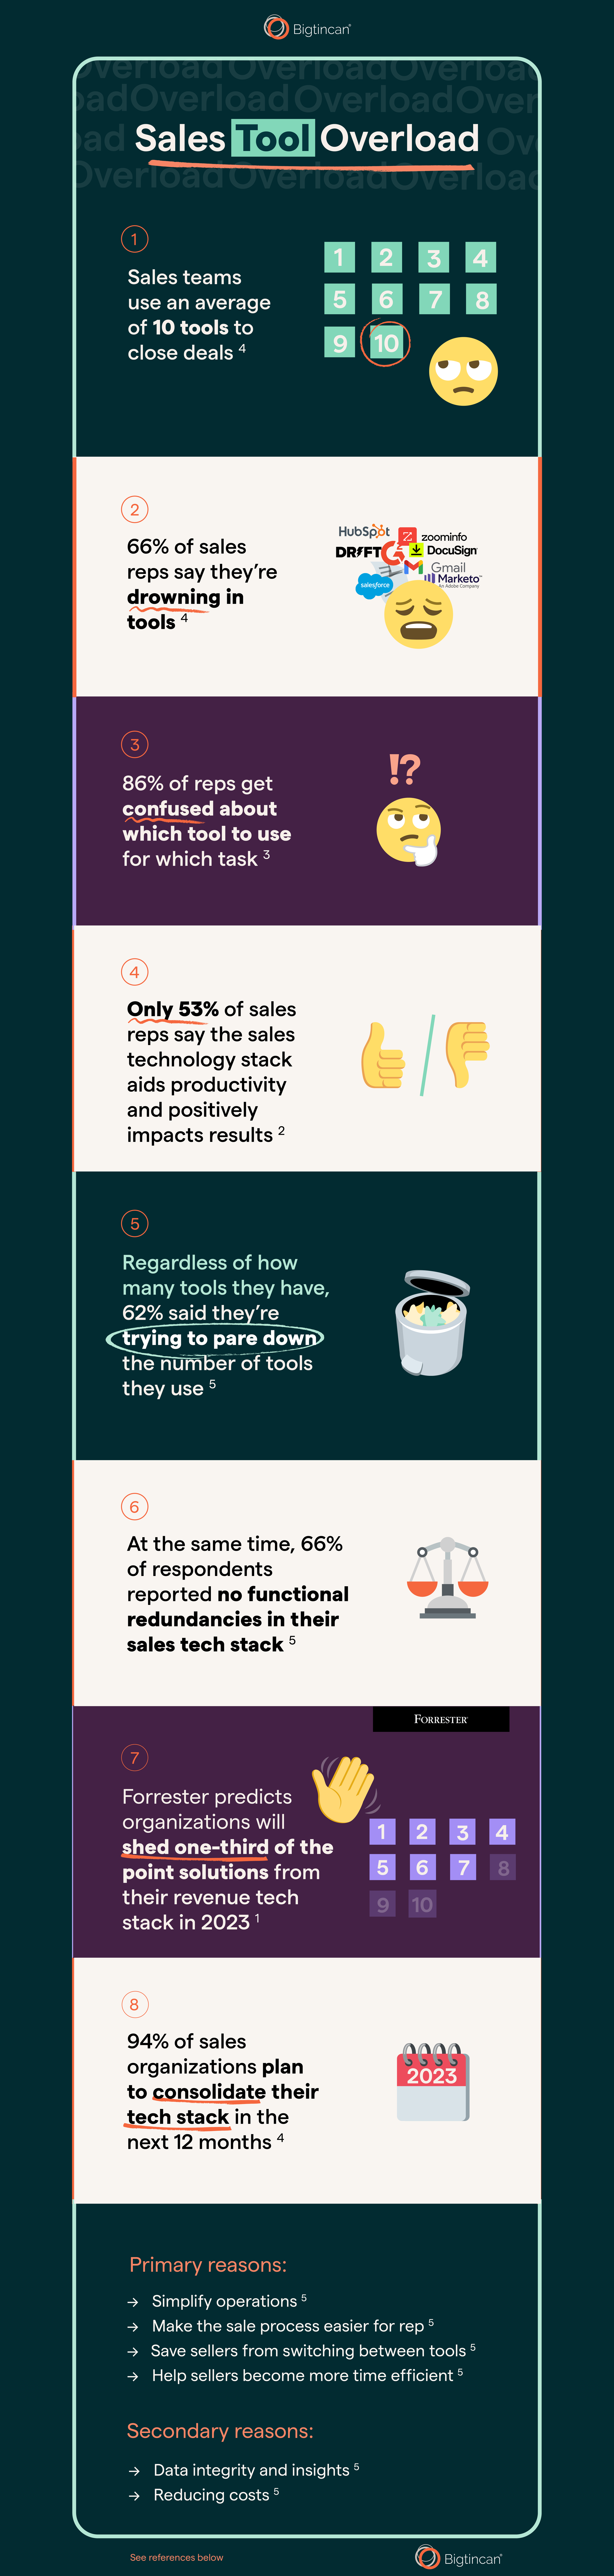 sales tool overload infographic